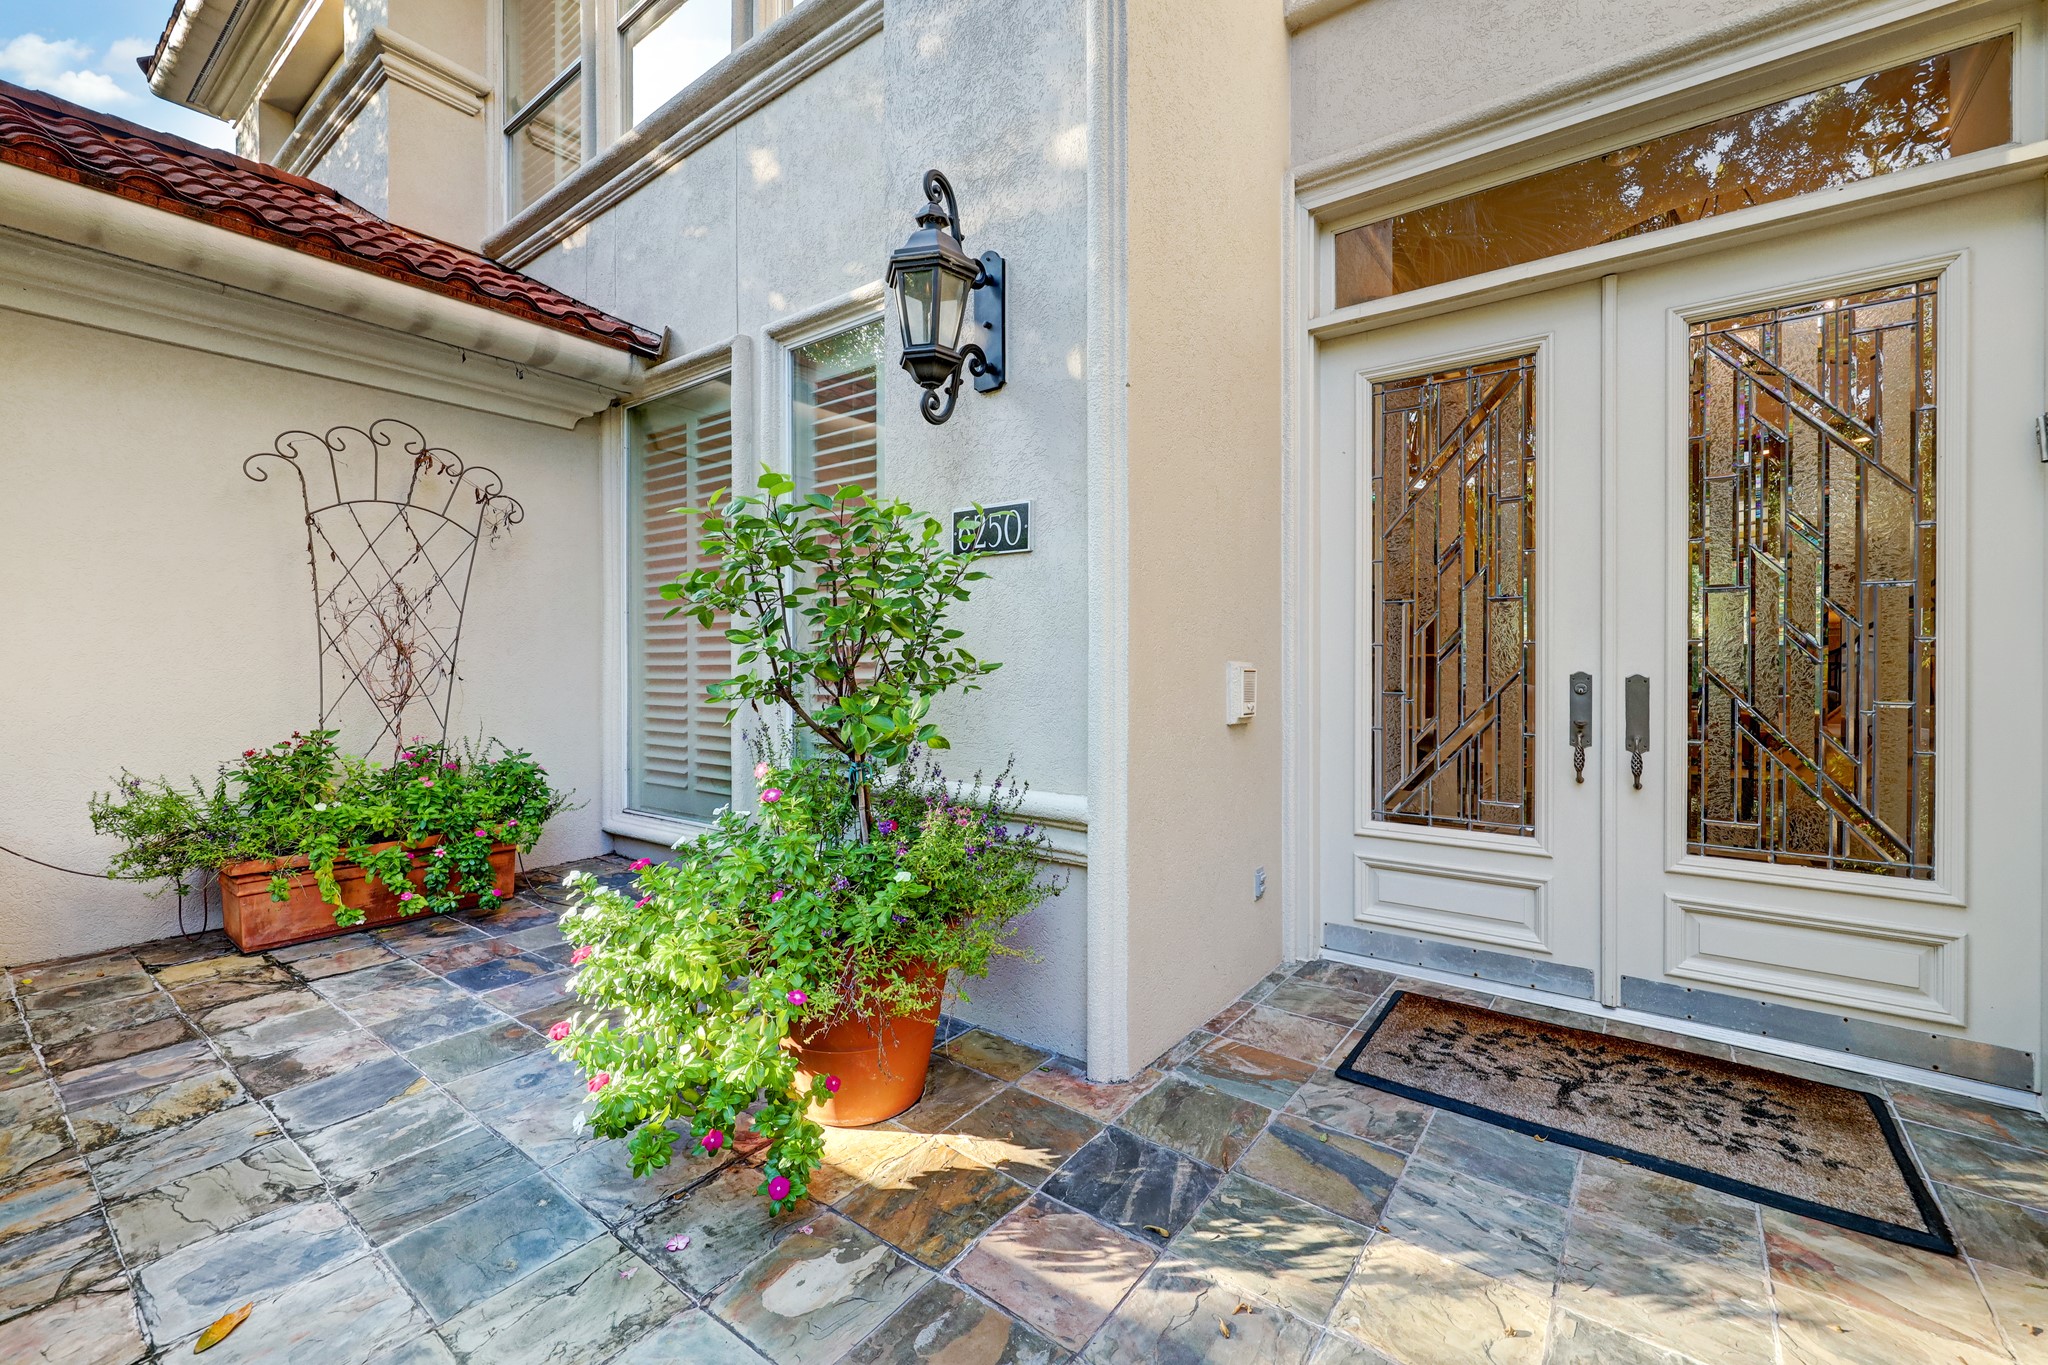 Inviting front patio with ample space for outdoor relaxation and entertainment, perfect for enjoying the neighborhood's charm and surrounding ambiance.